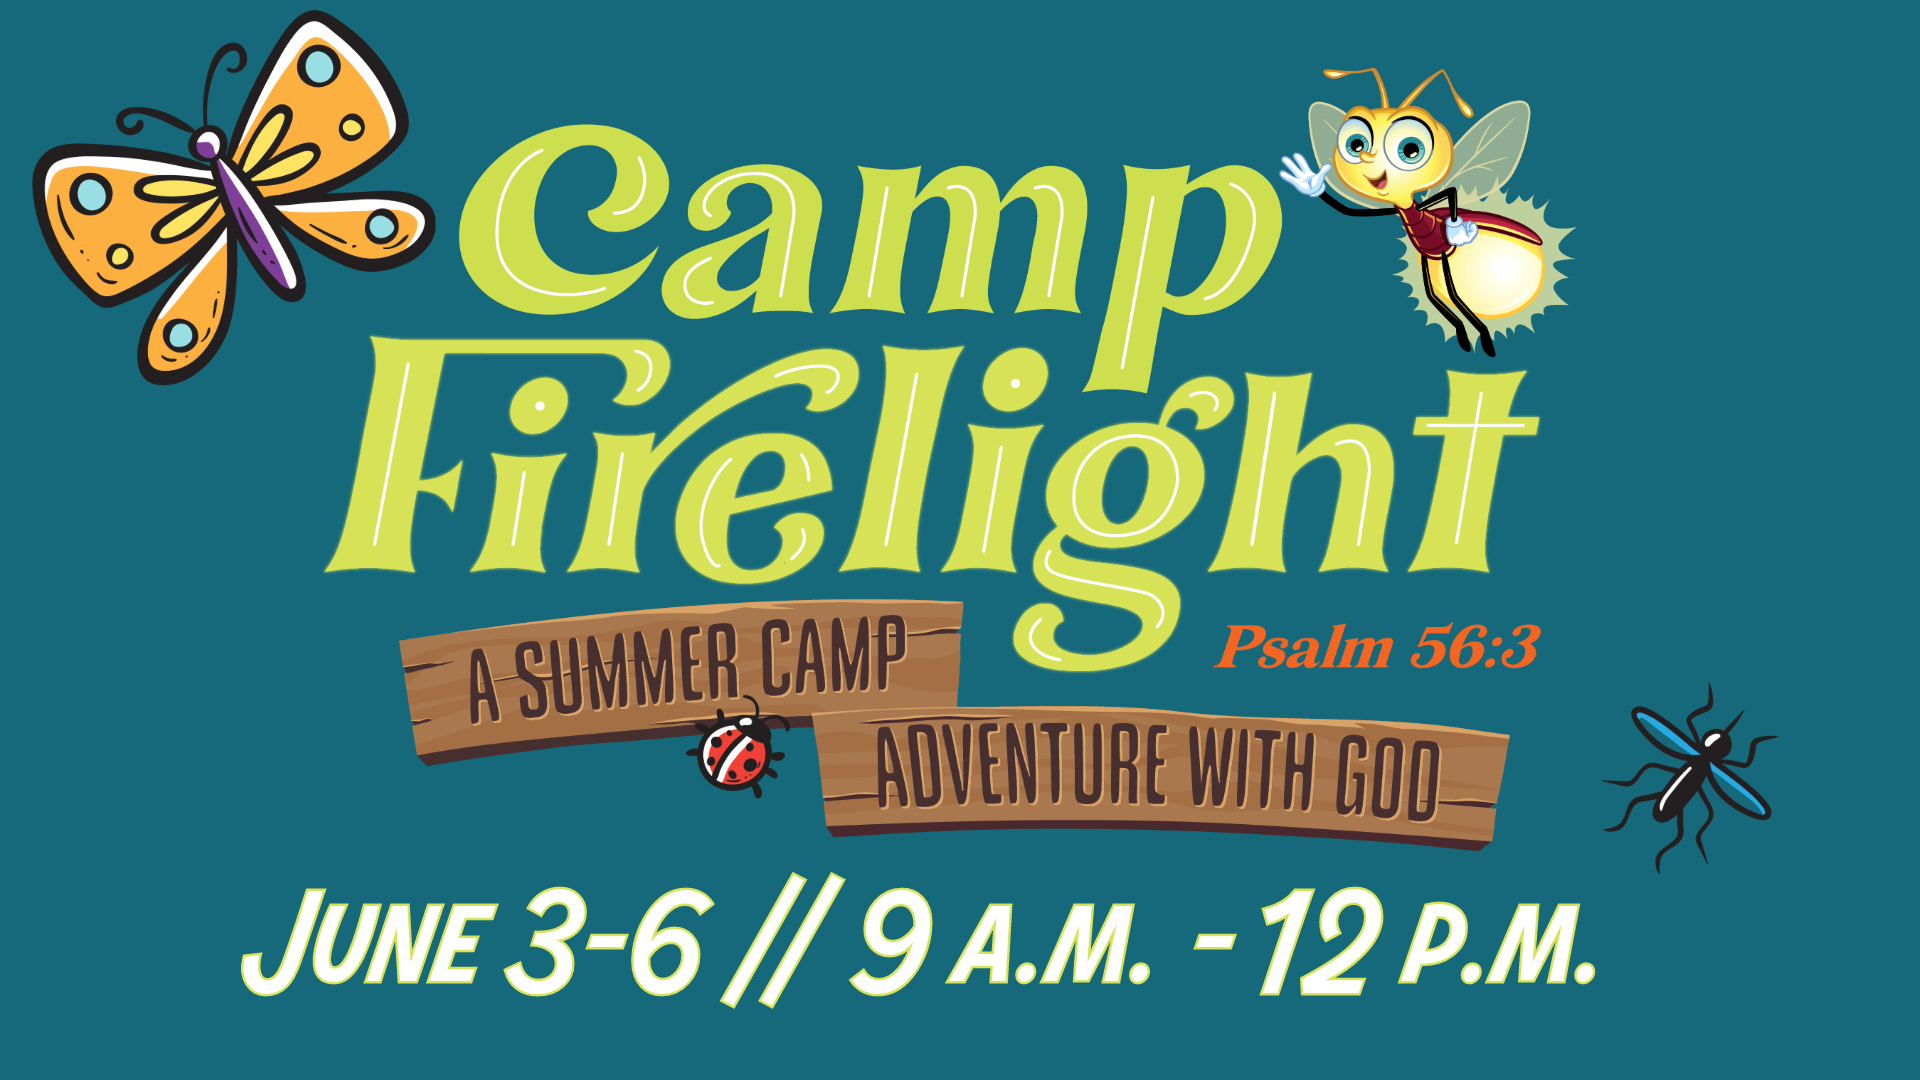 a button that says "camp firelight", a VBS summer camp on June 3-6 with different insects and a firefly